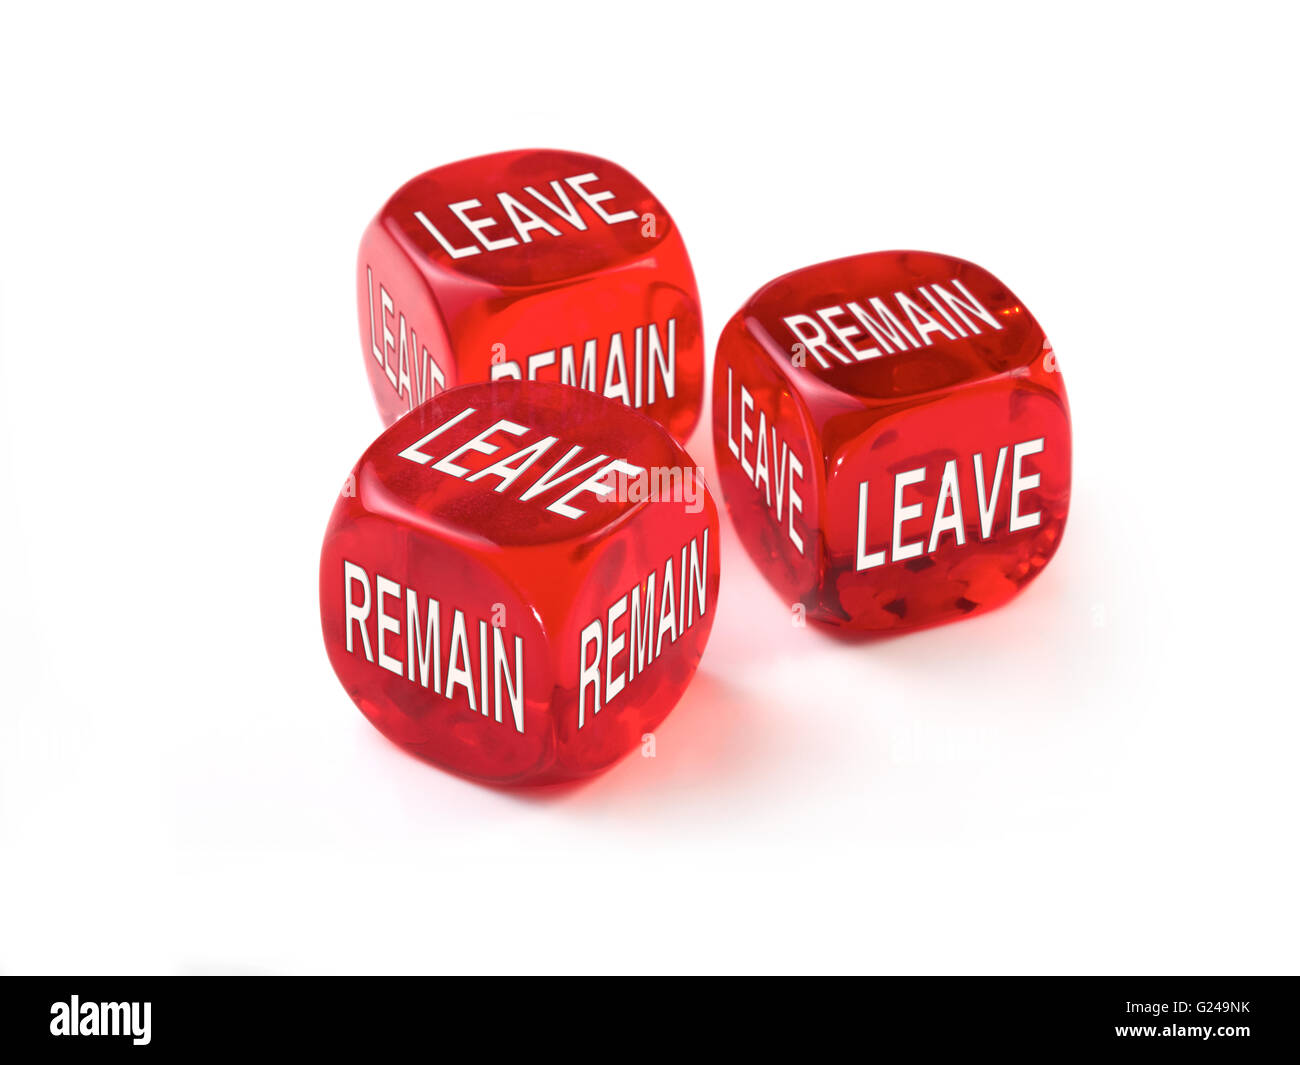 Leave or remain dice concept. United Kingdom European Elections to decide whether to leave the European Union for a more independent UK. Stock Photo